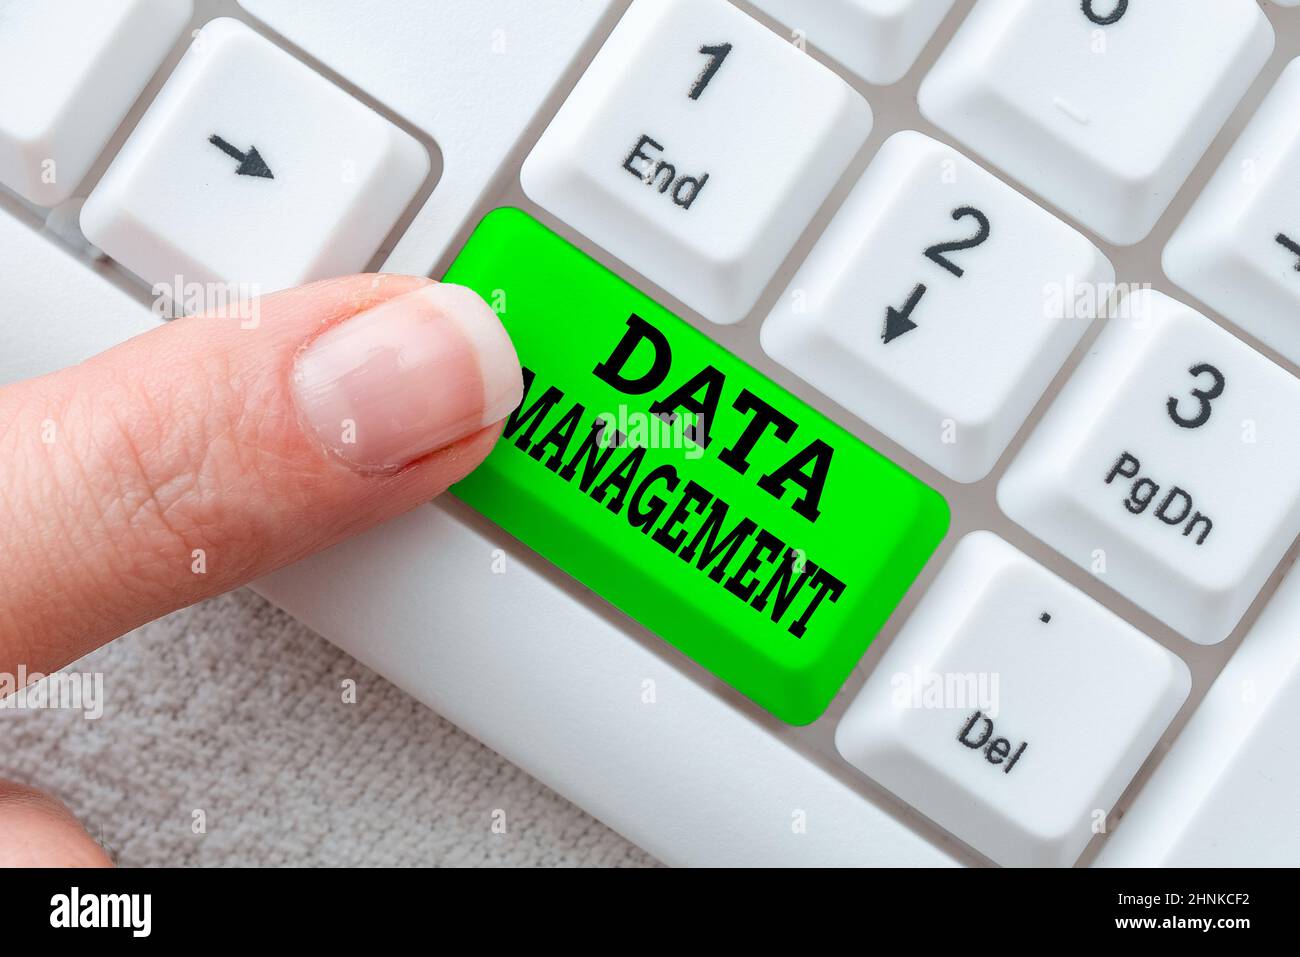 Text showing inspiration Data Management, Business concept disciplines related to managing data as a valuable resource Abstract Recording List Of Onli Stock Photo